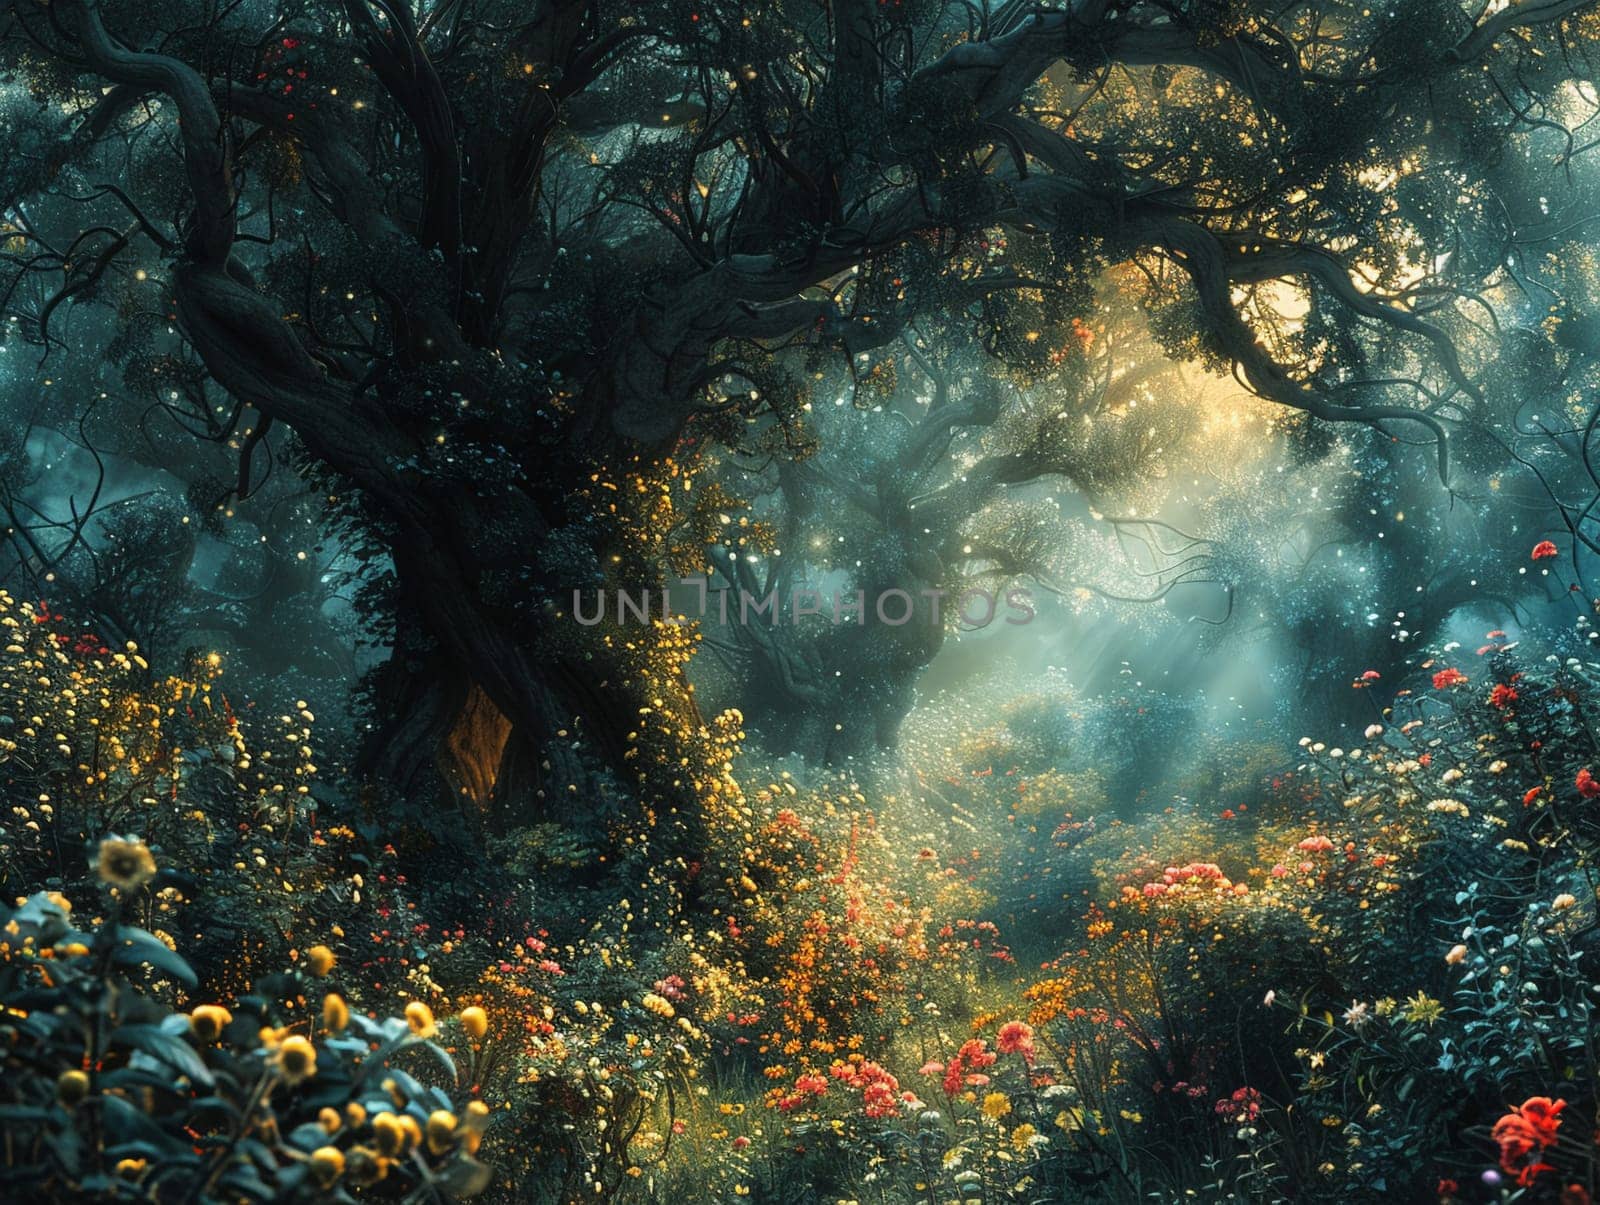 Photoshop creation of an enchanted forest by Benzoix